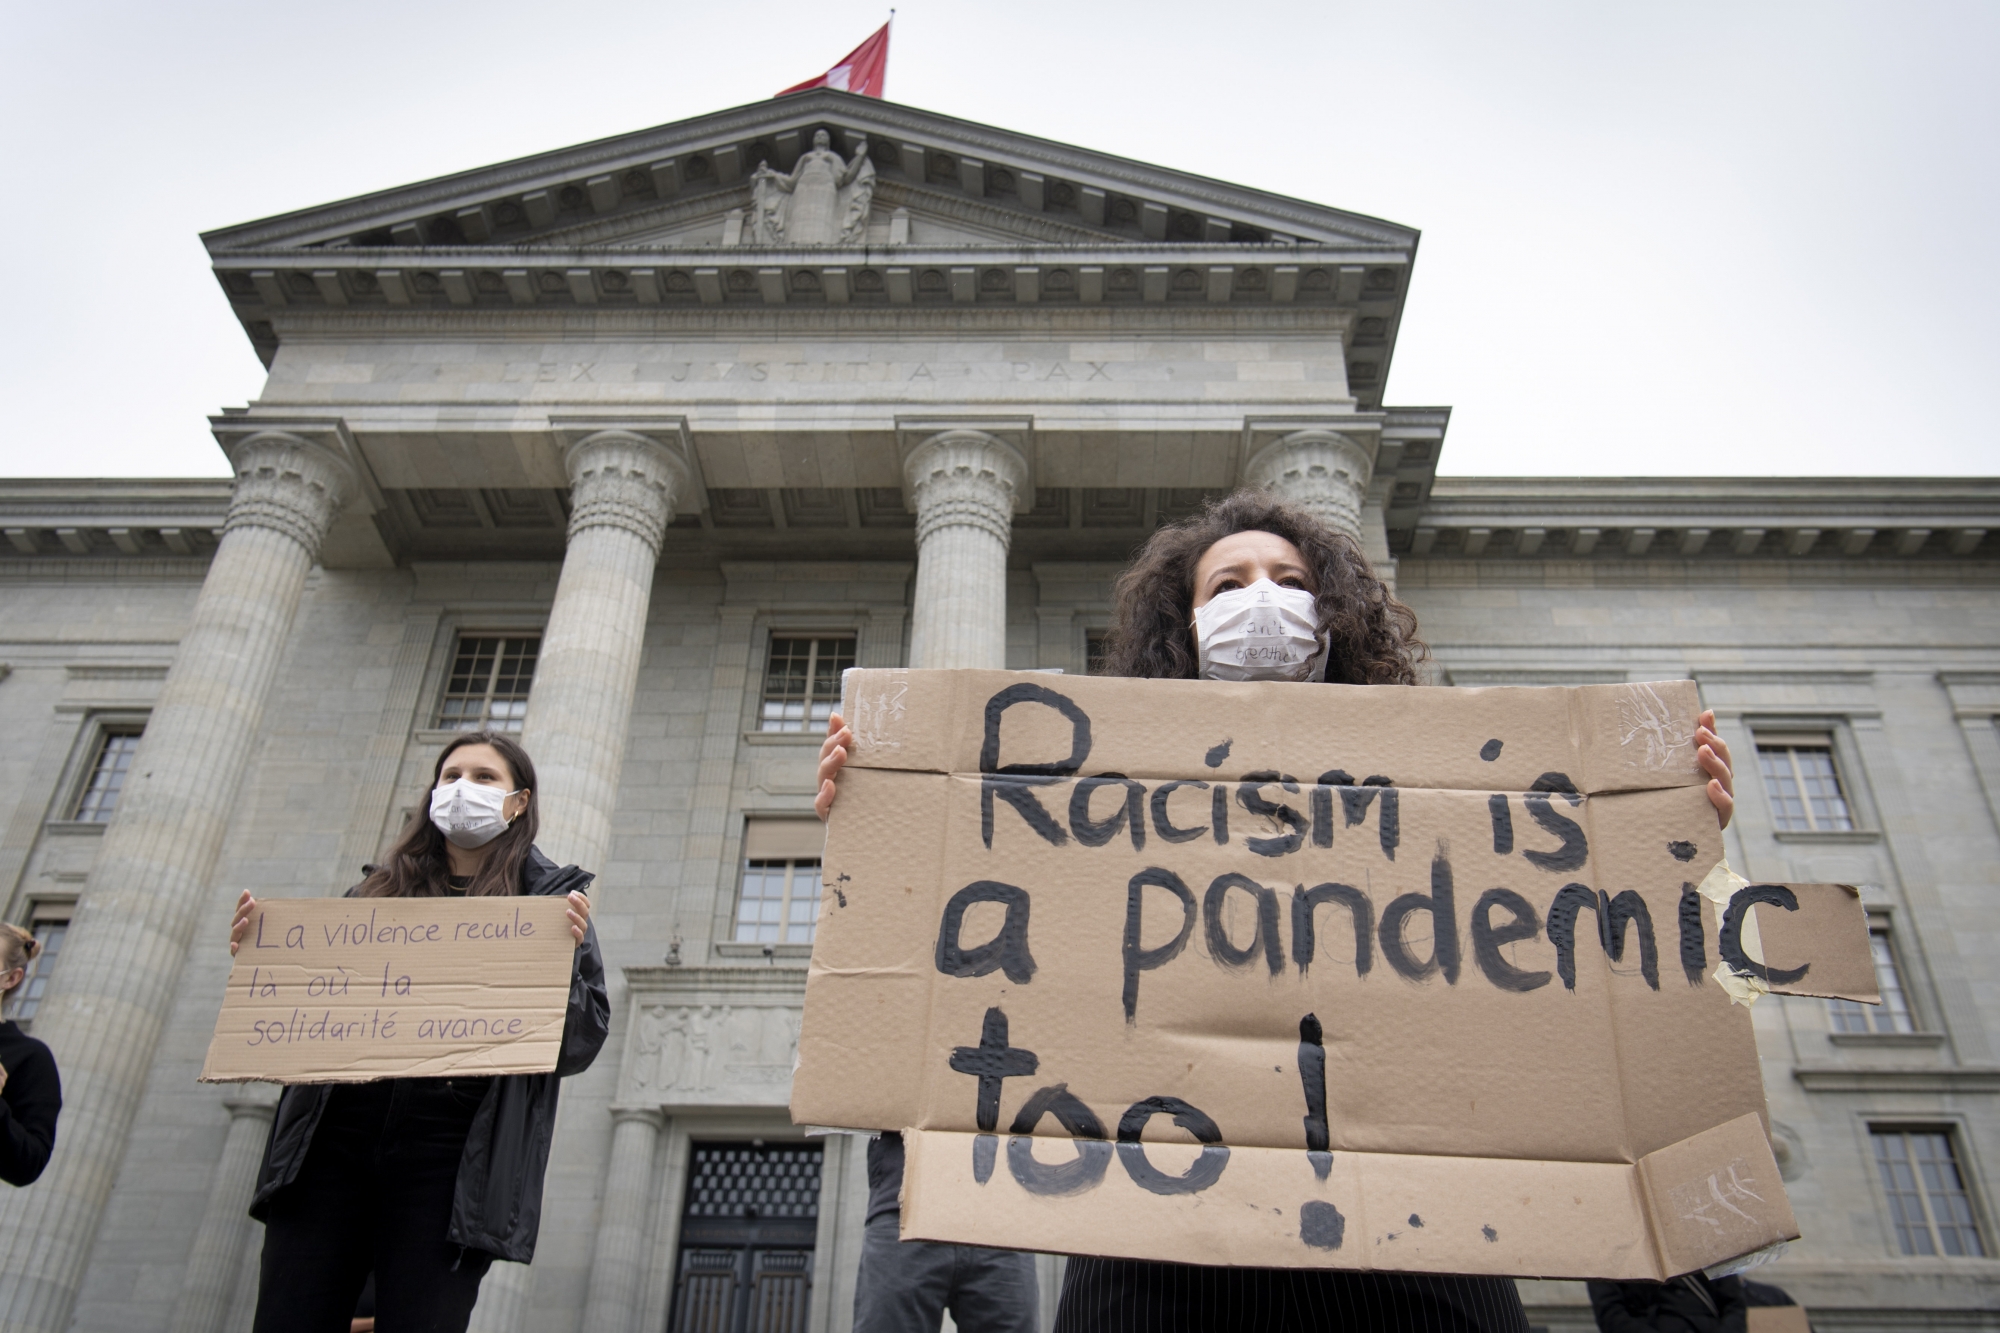 epa08471355 Protesters hold placards in front of the Federal Supreme Court of Switzerland during a Black Lives Matter (BLM) protest, in Lausanne, Switzerland, 07 June 2020. Several thousand people gathered to protest against racism and police violence despite the state of emergency of the coronavirus disease (COVID-19) outbreak and the ban on gatherings of more than 300 people.  EPA/LAURENT GILLIERON
ArcInfo